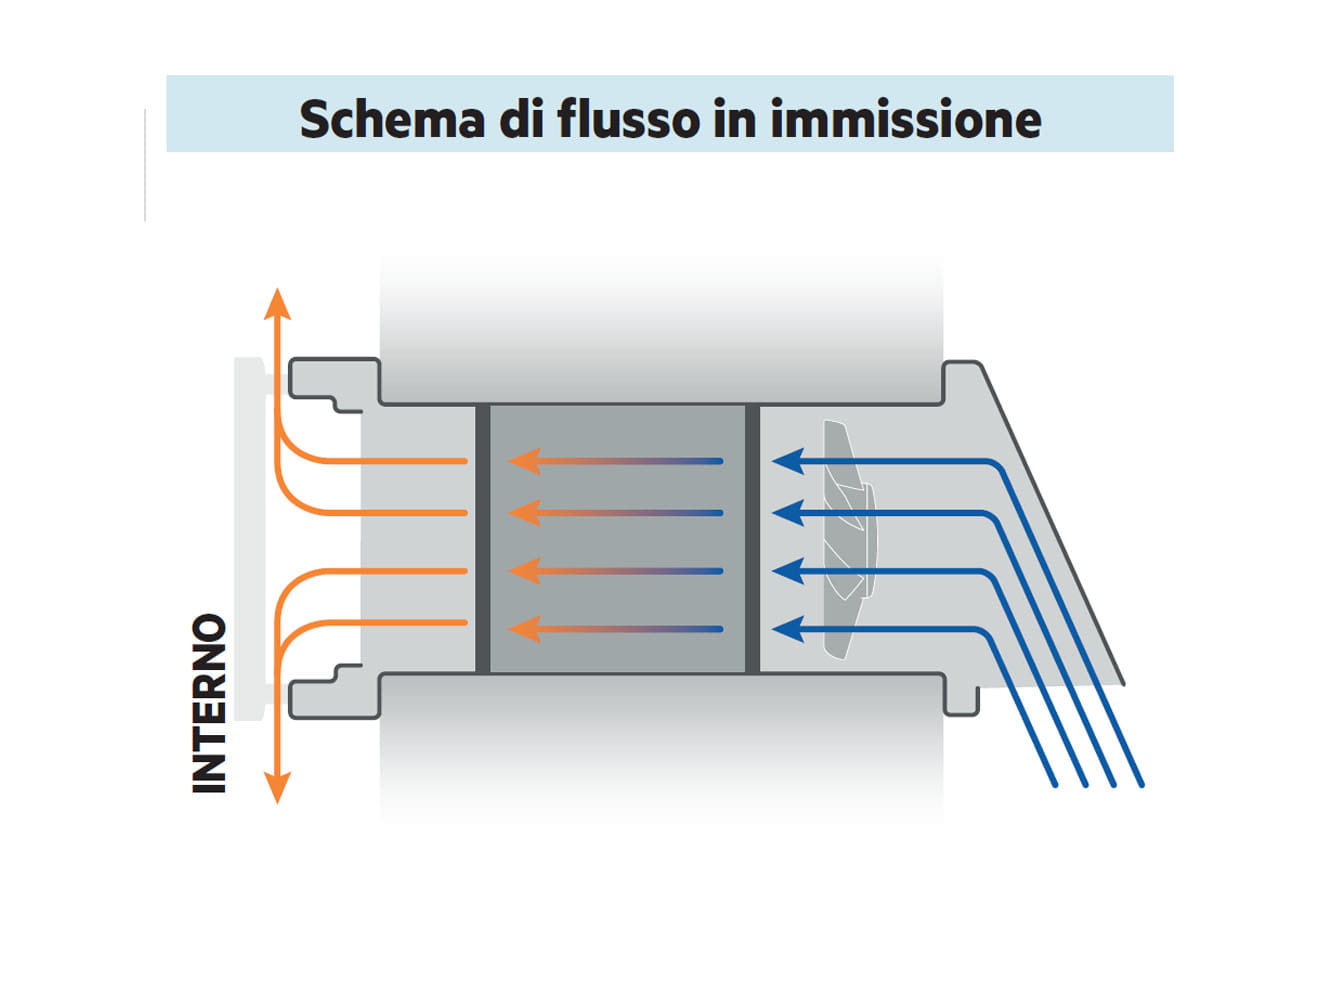 PULSE 61 - flusso in immissione